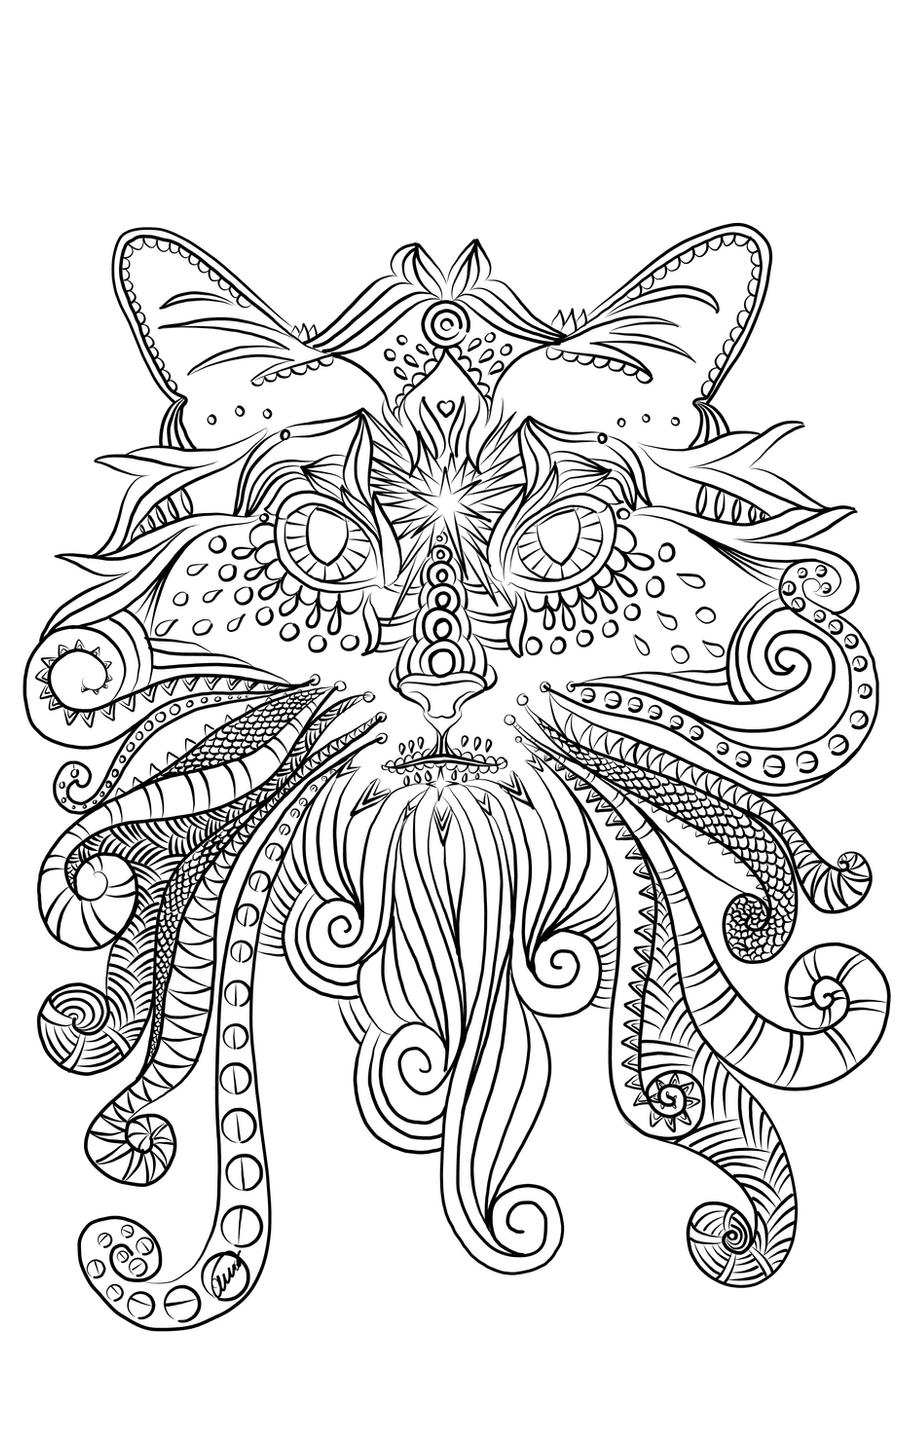 Coloring Page- The Magnificent Cat